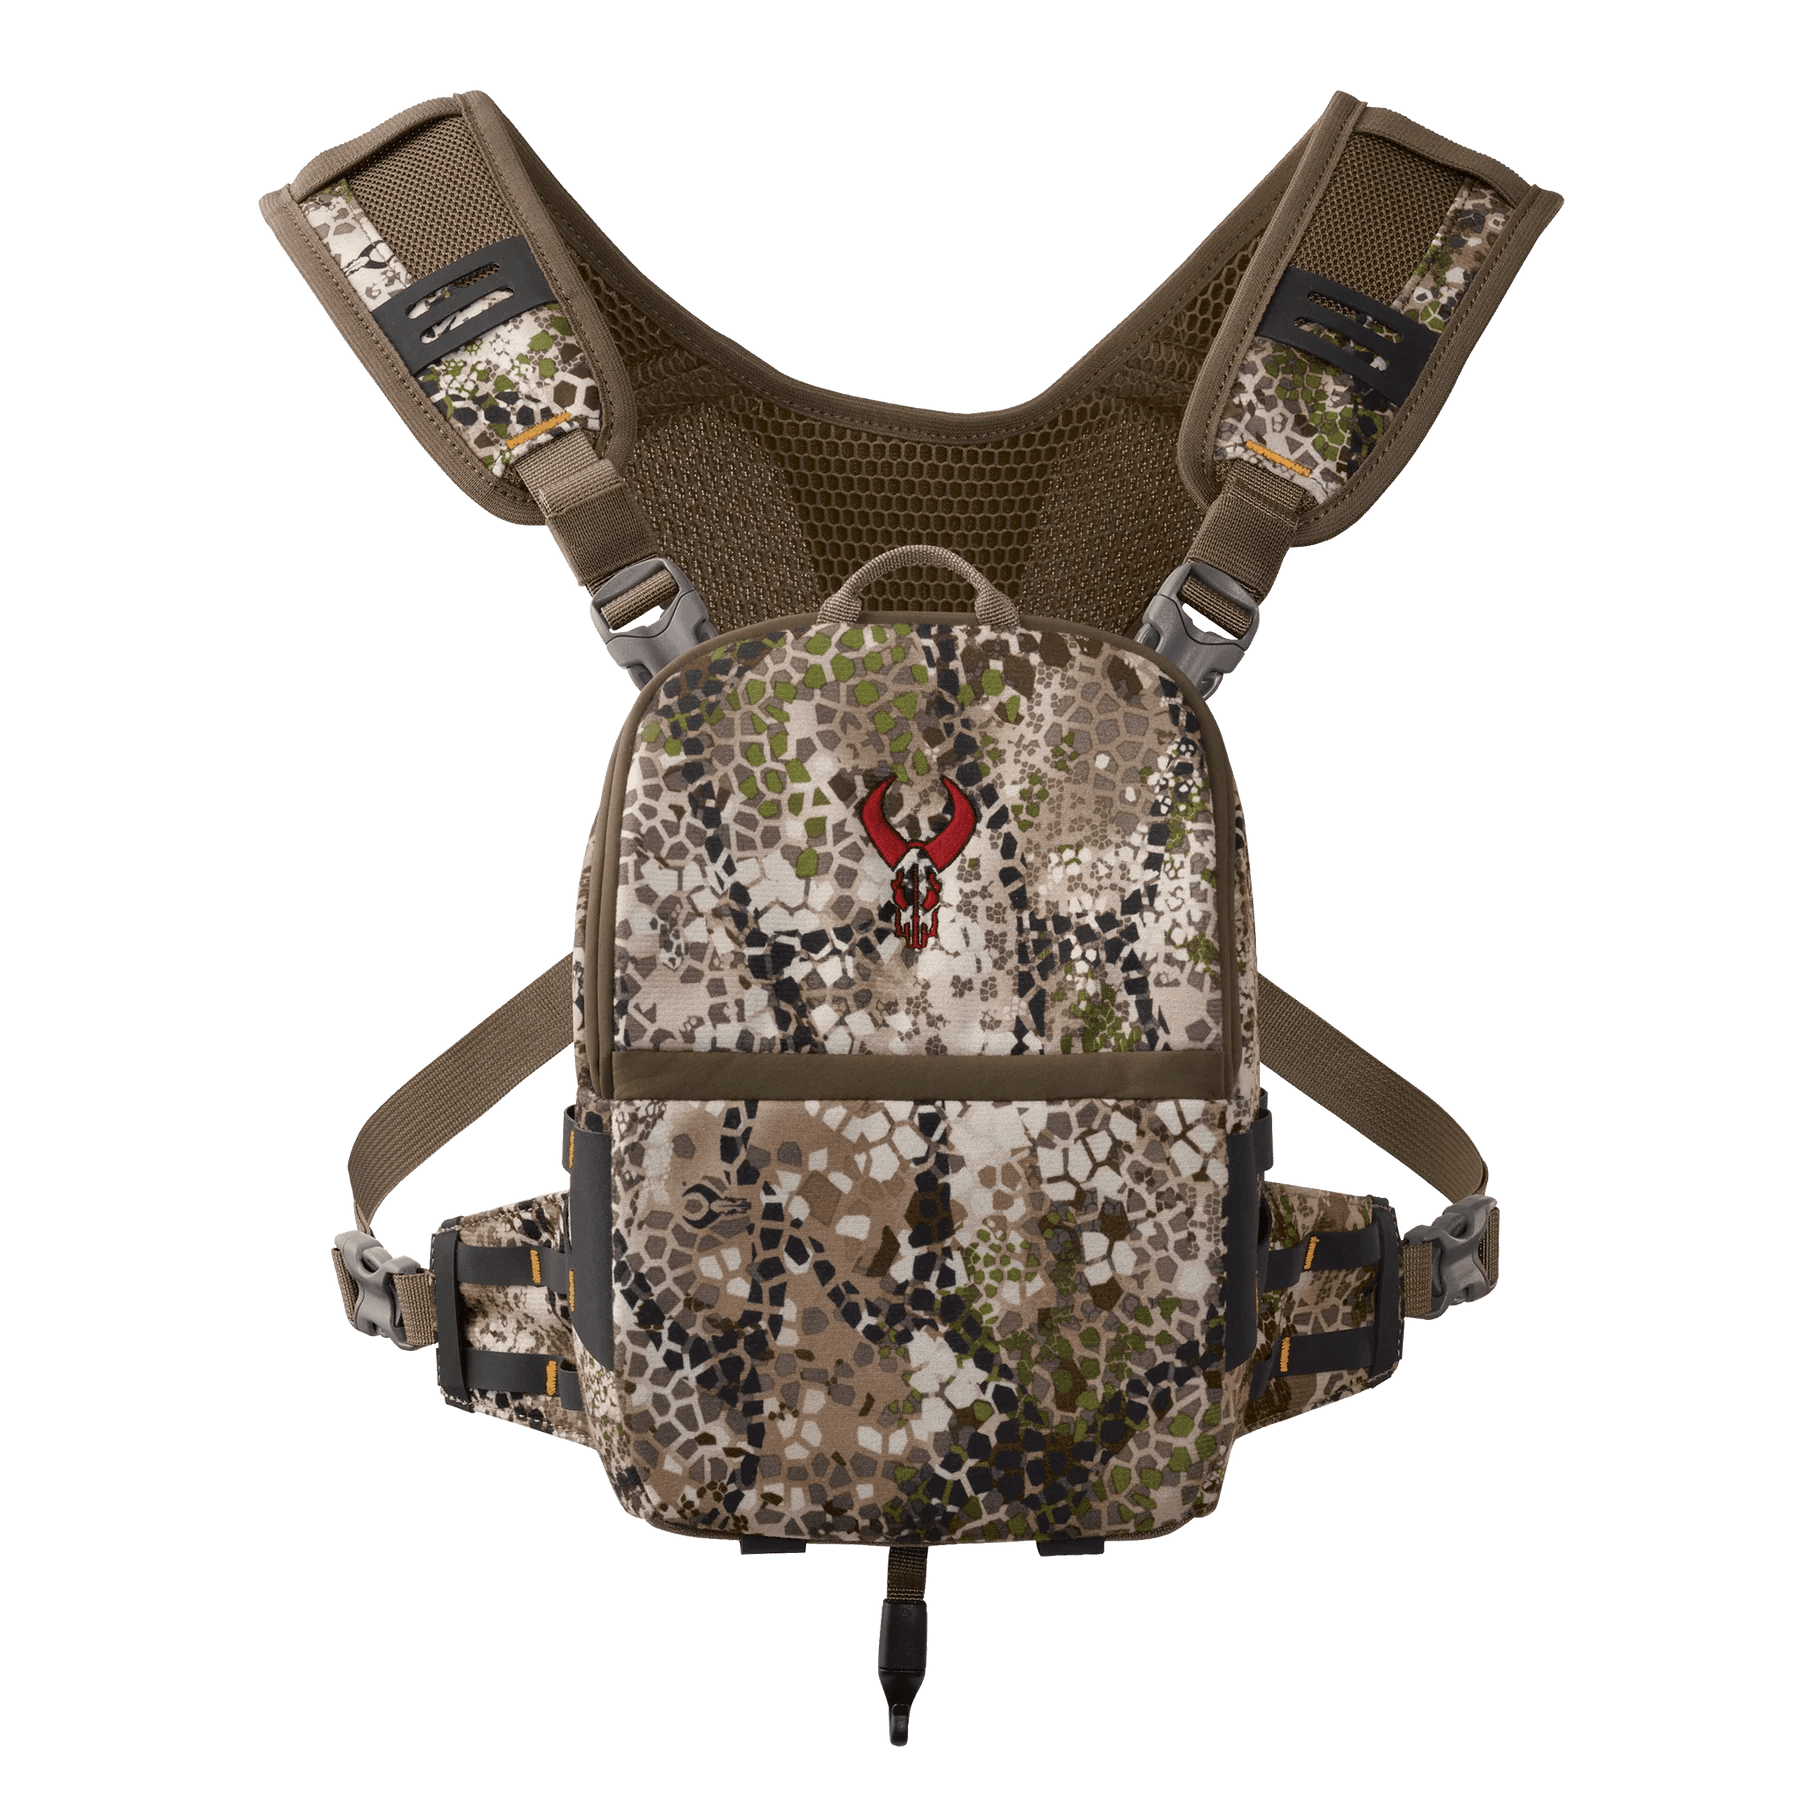 Badlands Bino Mag 2 - Leapfrog Outdoor Sports and Apparel